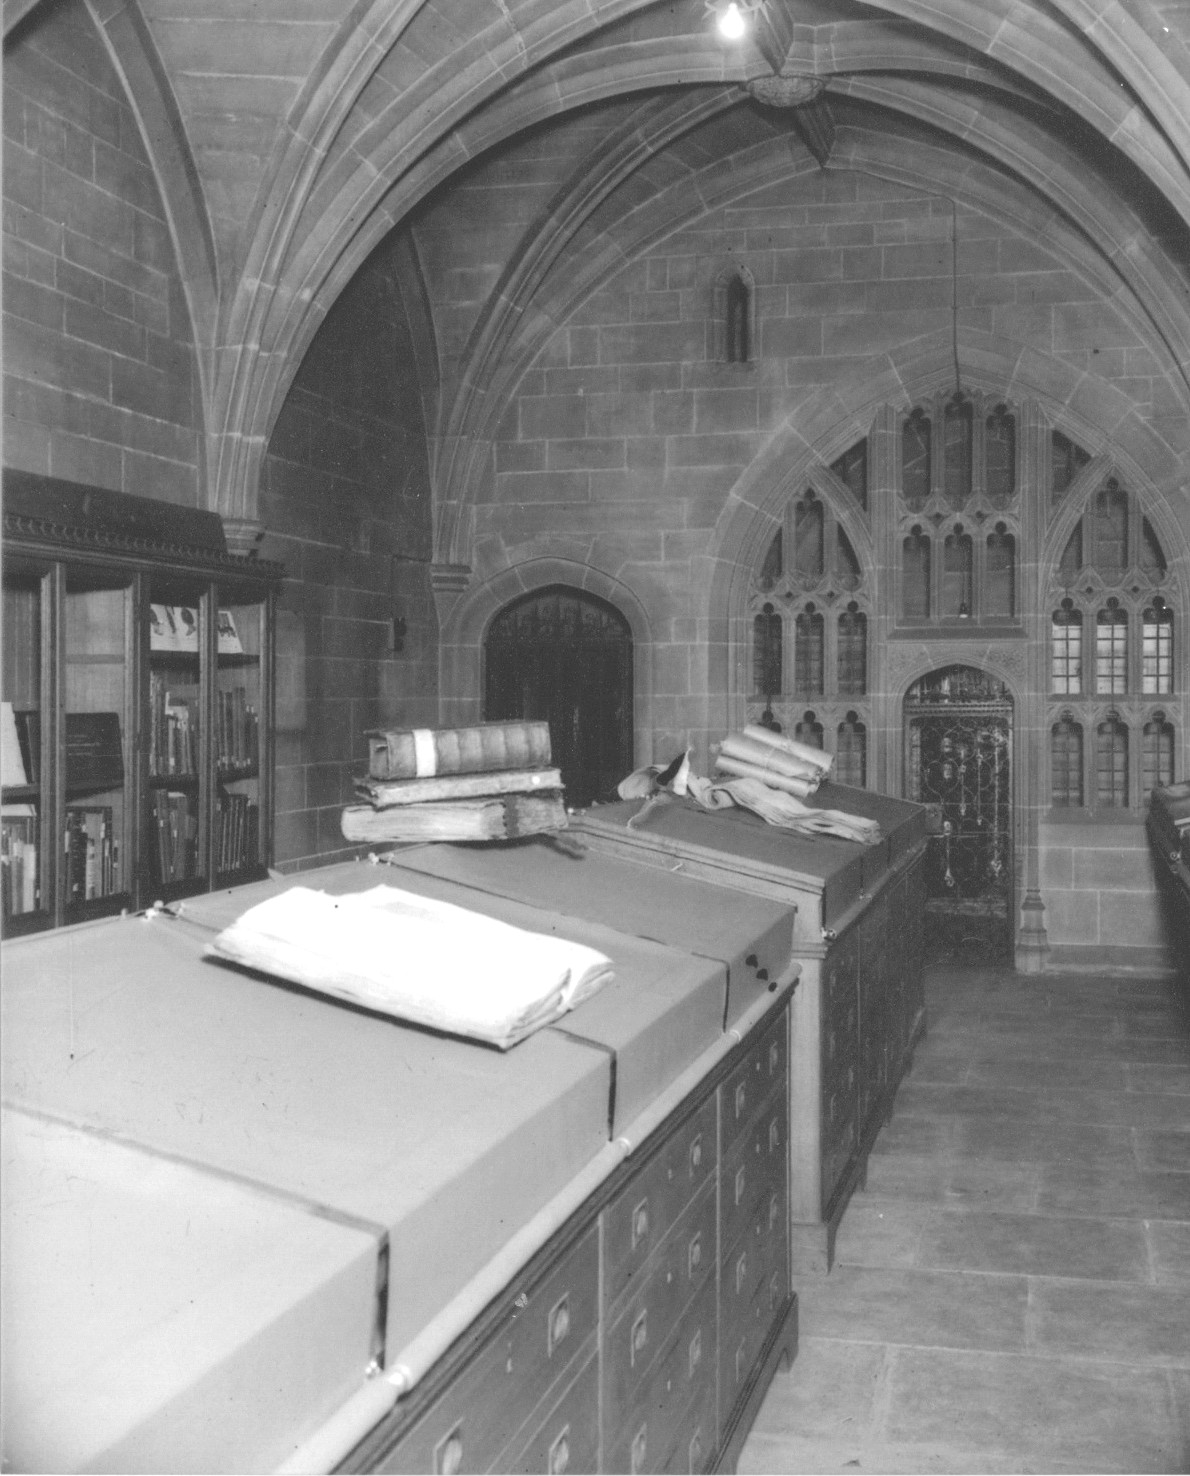 A black and white photograph of the inside of the Muniment Room at St Mary's Guildhall - a medieval building with an arched ceiling and gothic windows. Inside the room are books resting on top of a filing cabinet.